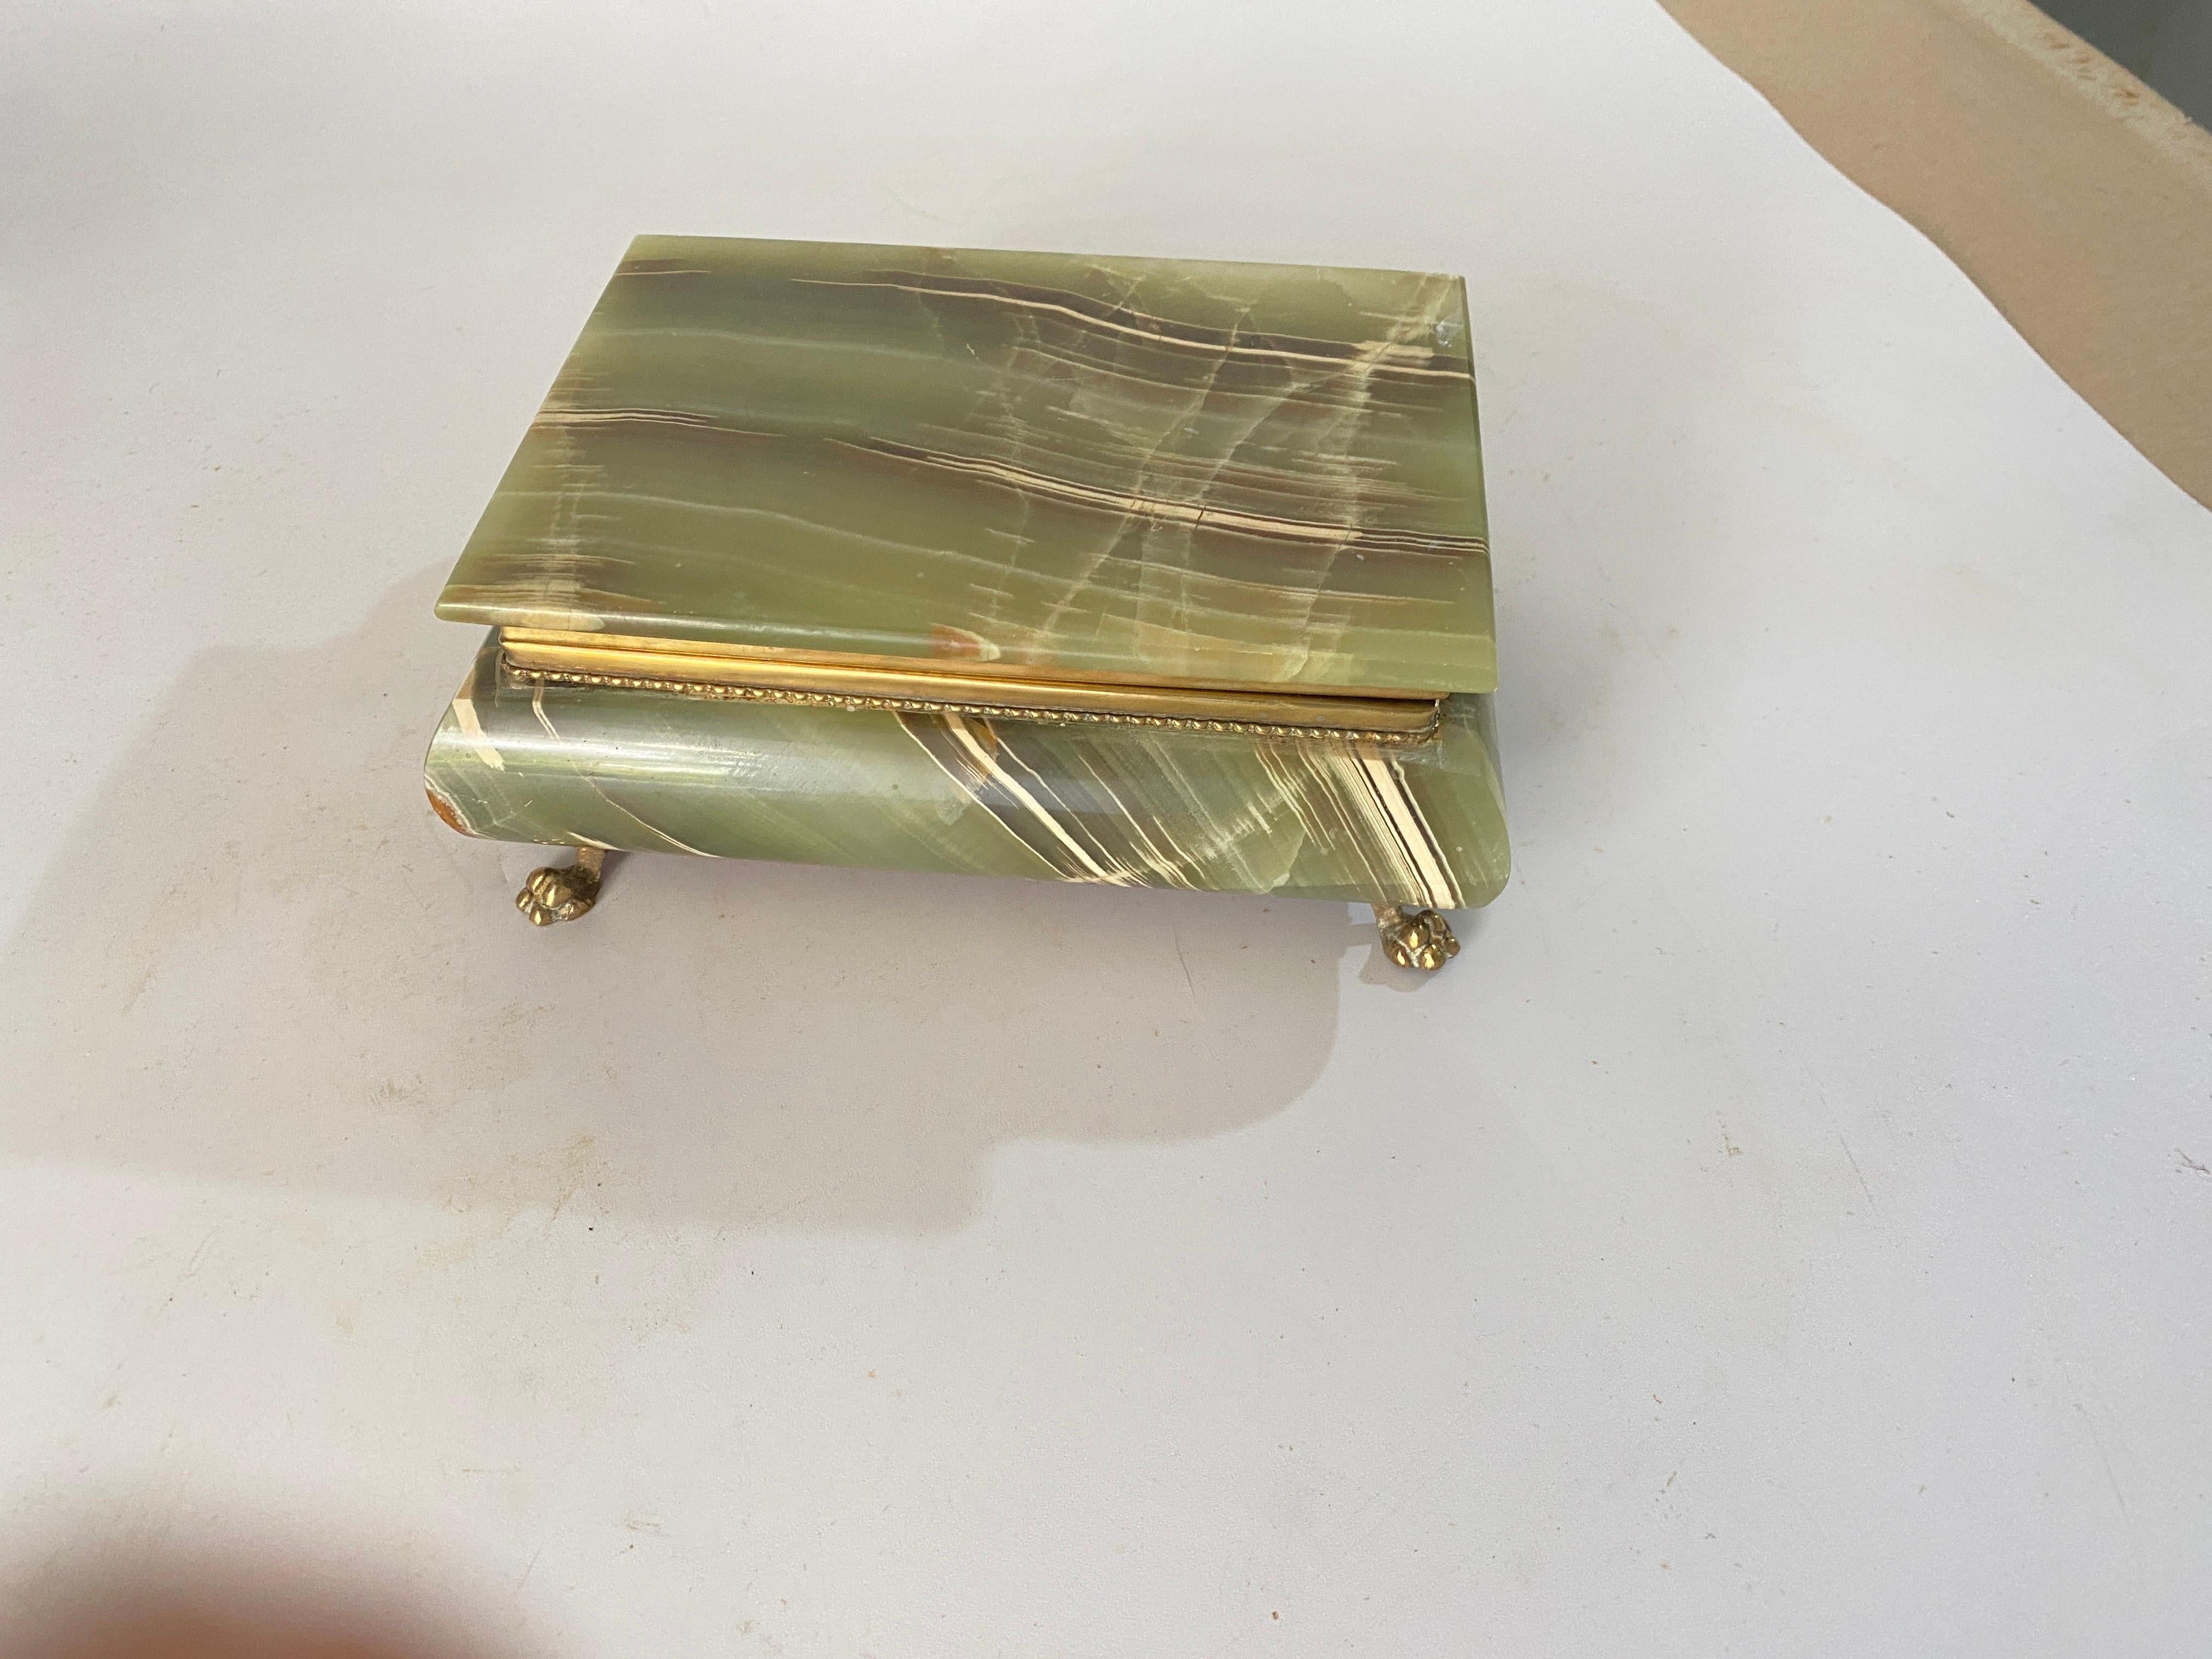  Green Onyx Marble and Brass Jewelry Display Box, Italy 1950 For Sale 7